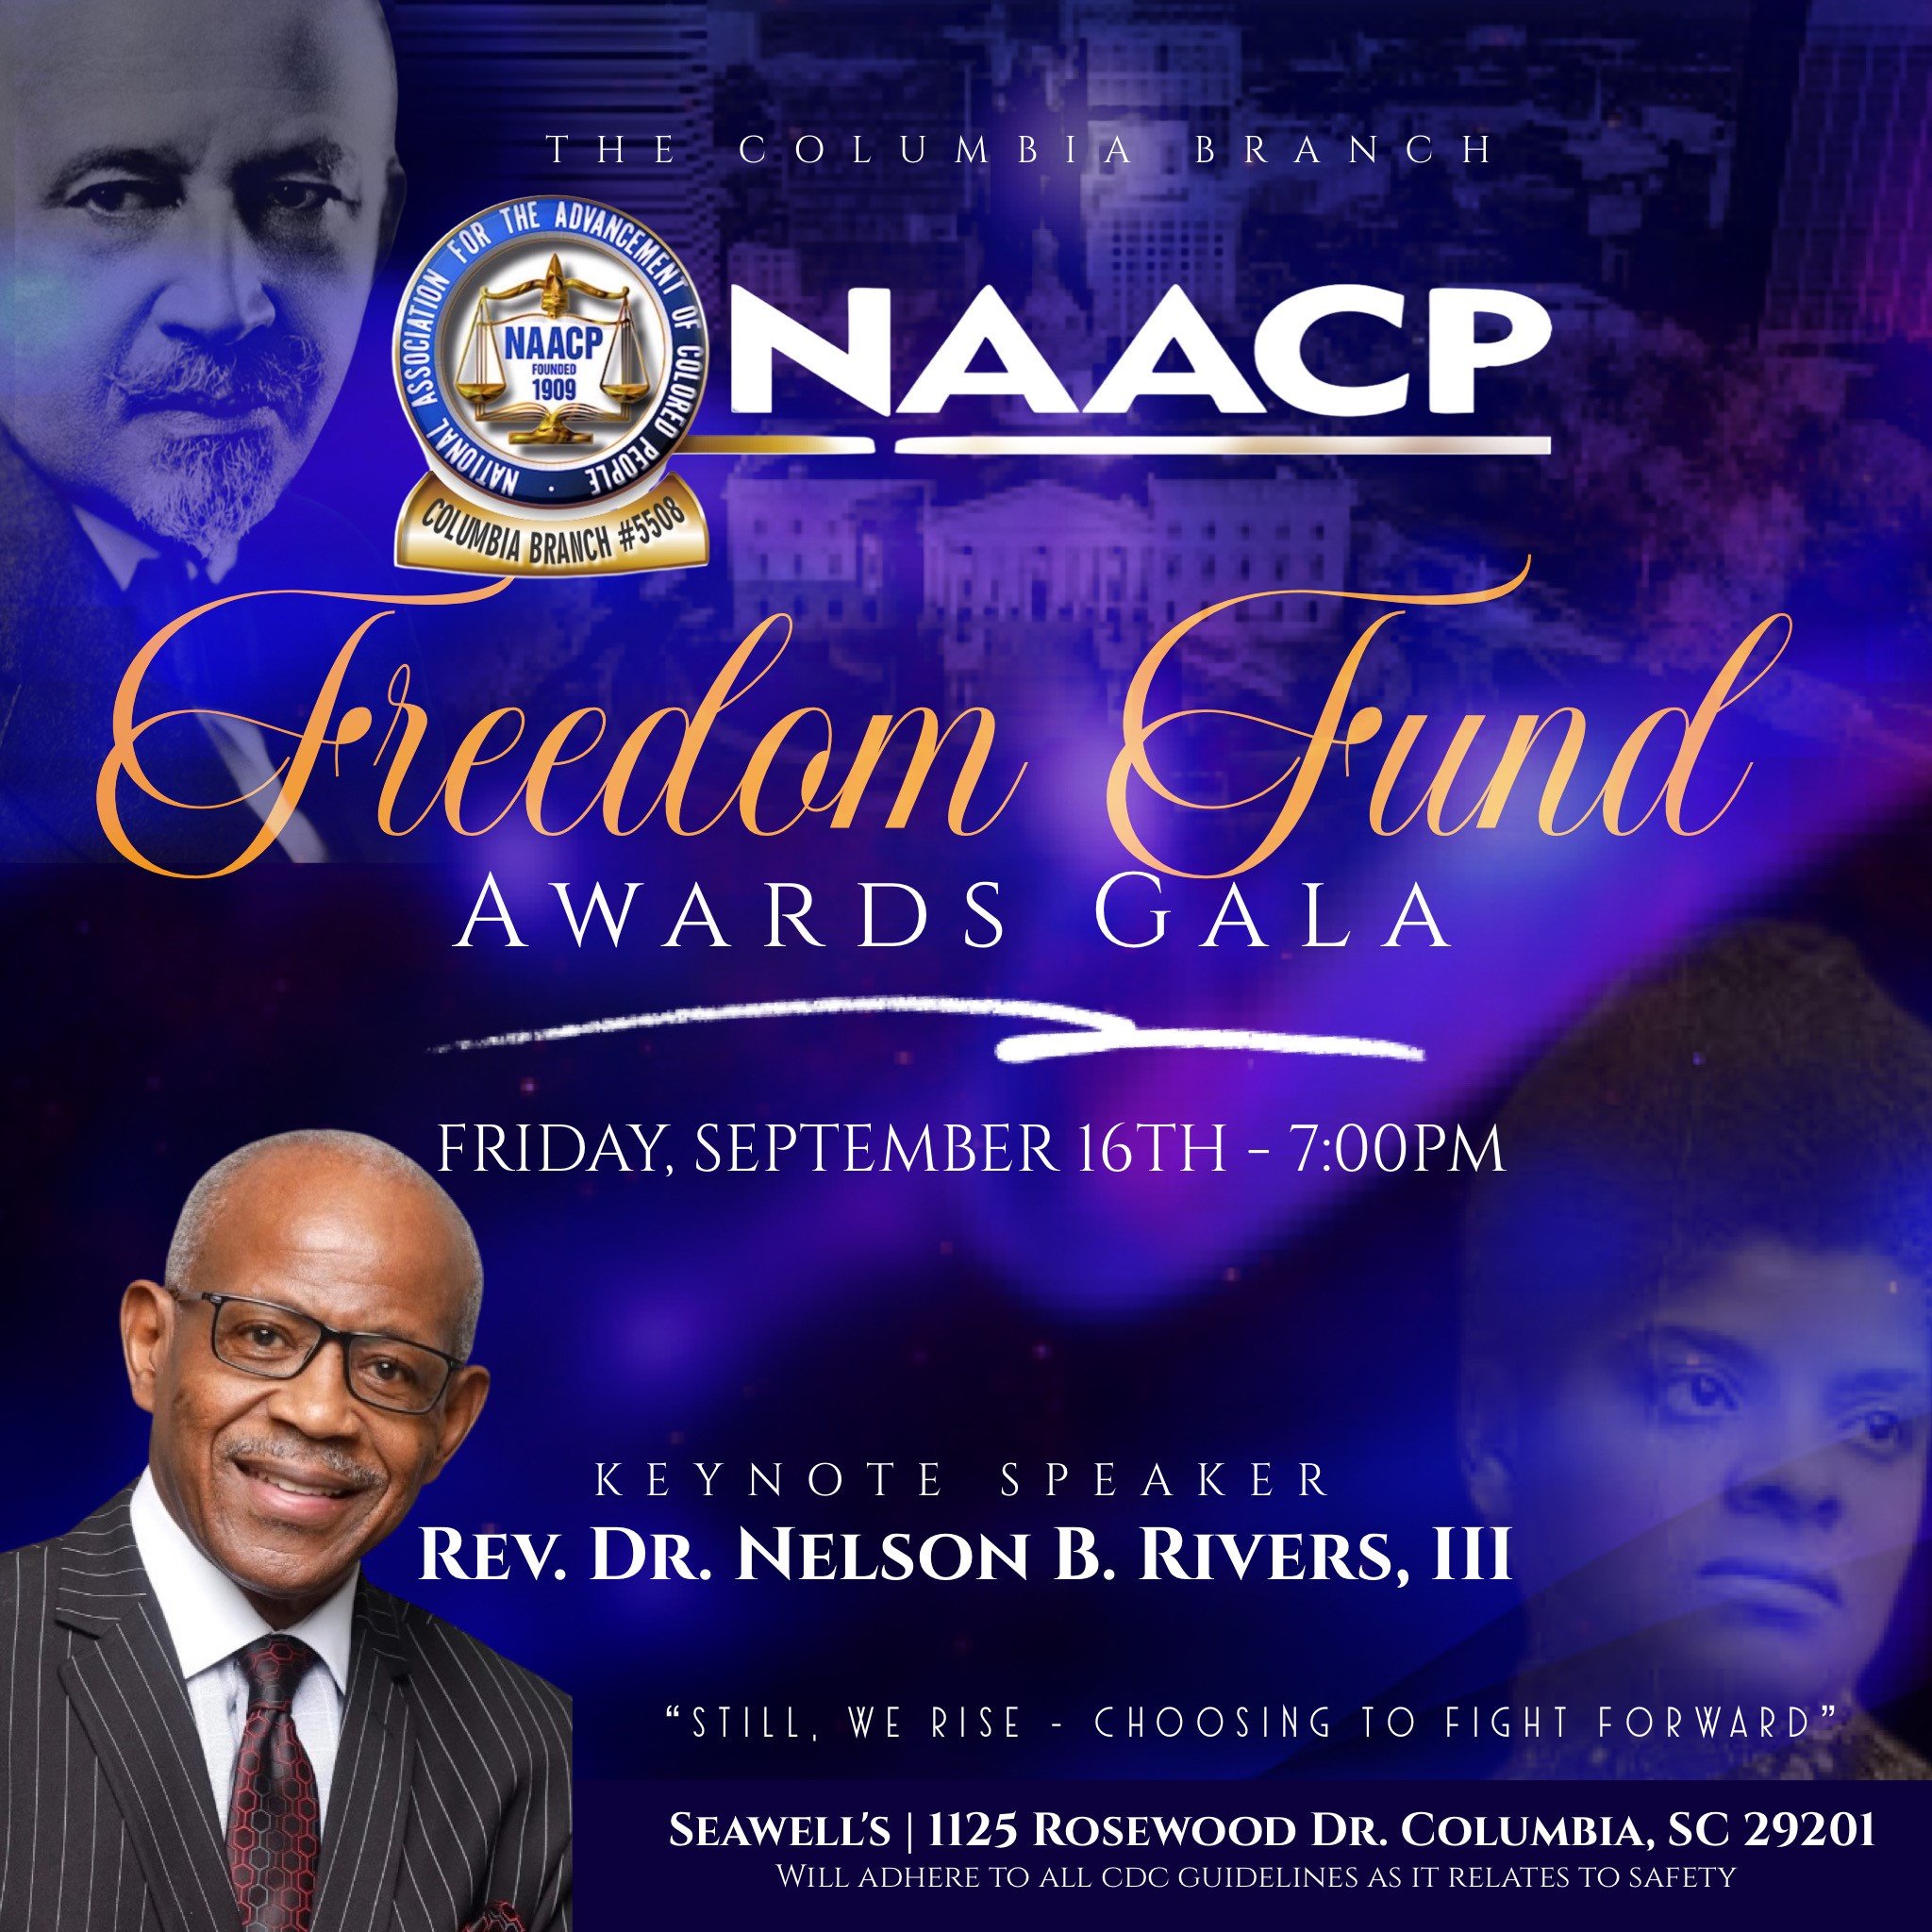 NAACP Columbia's 35th Annual Freedom Fund Awards Gala this Friday!